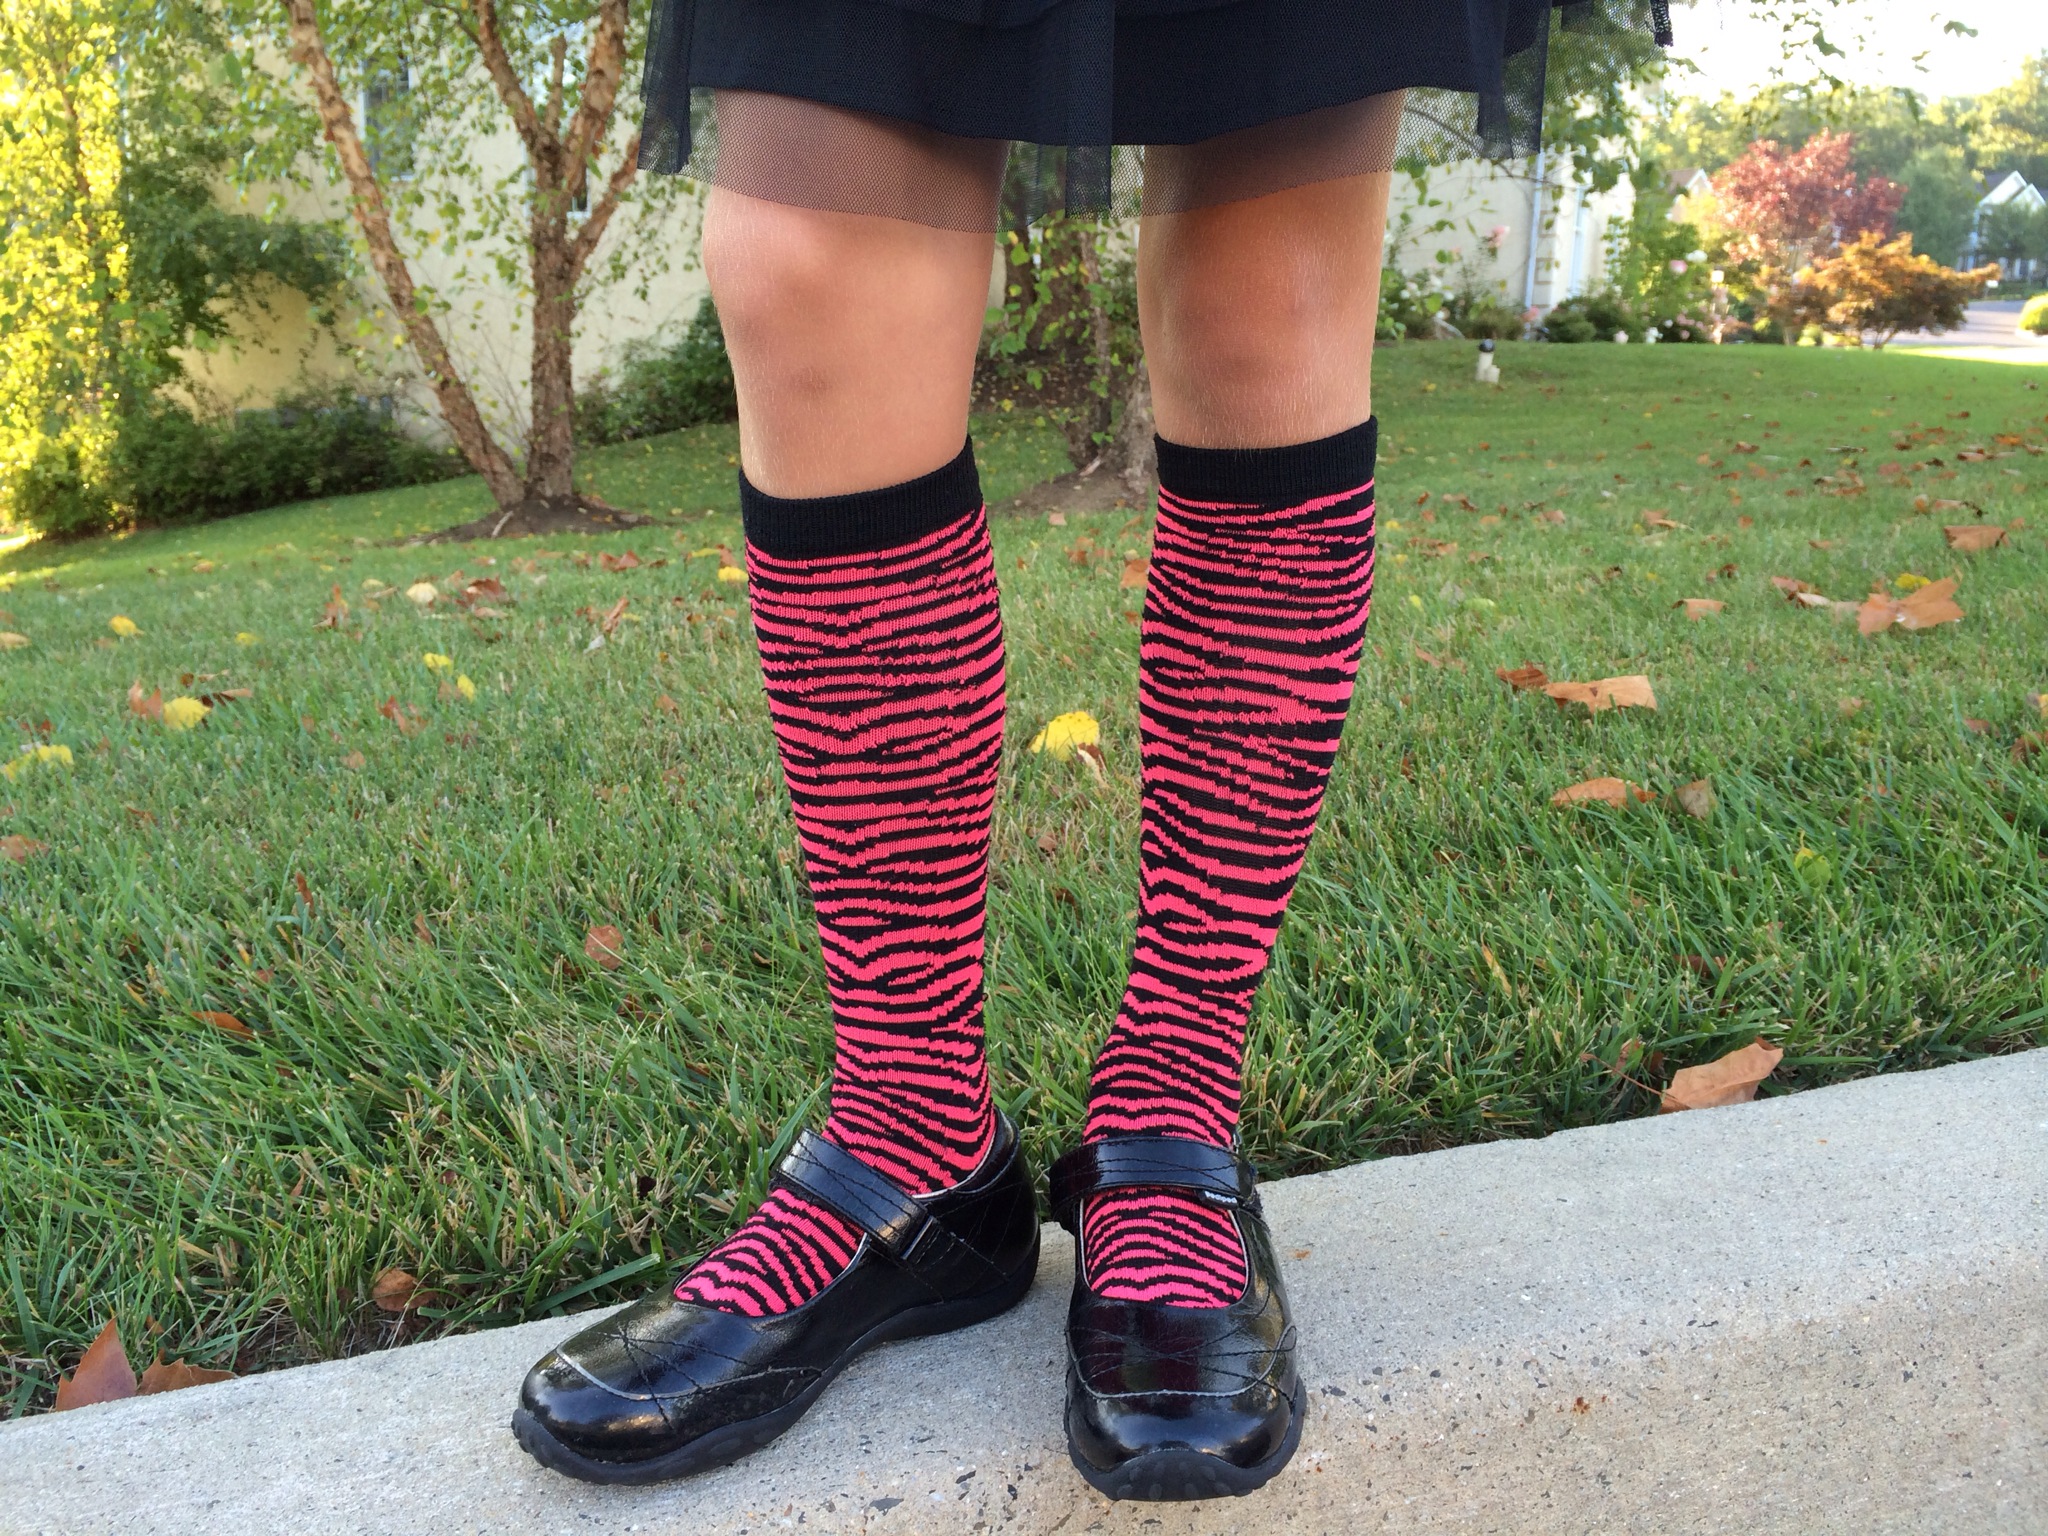 Kid Fashion: Tall Socks for the Win #WMTMoms - Classy Mommy